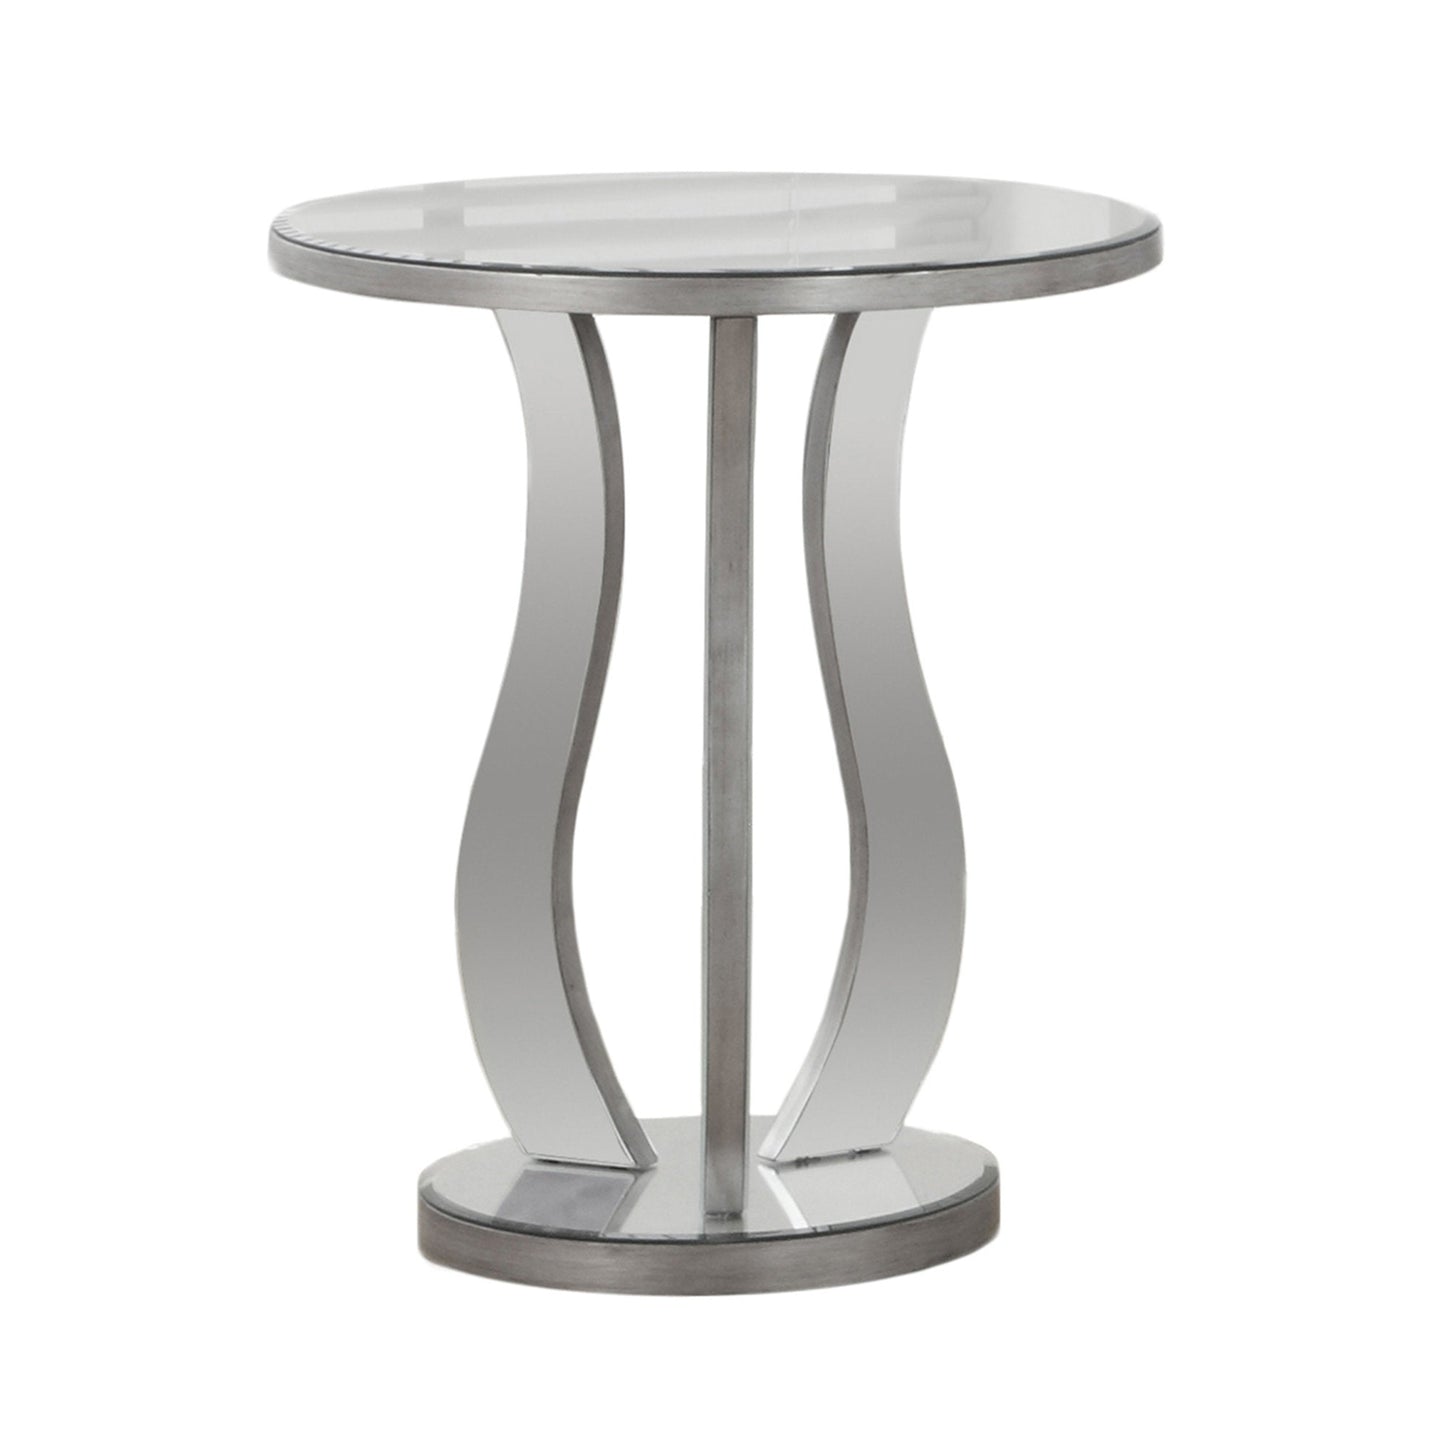 20"Dia Eucalyptus Wood Mirrored Bedroom Accent Table in Brushed Silver